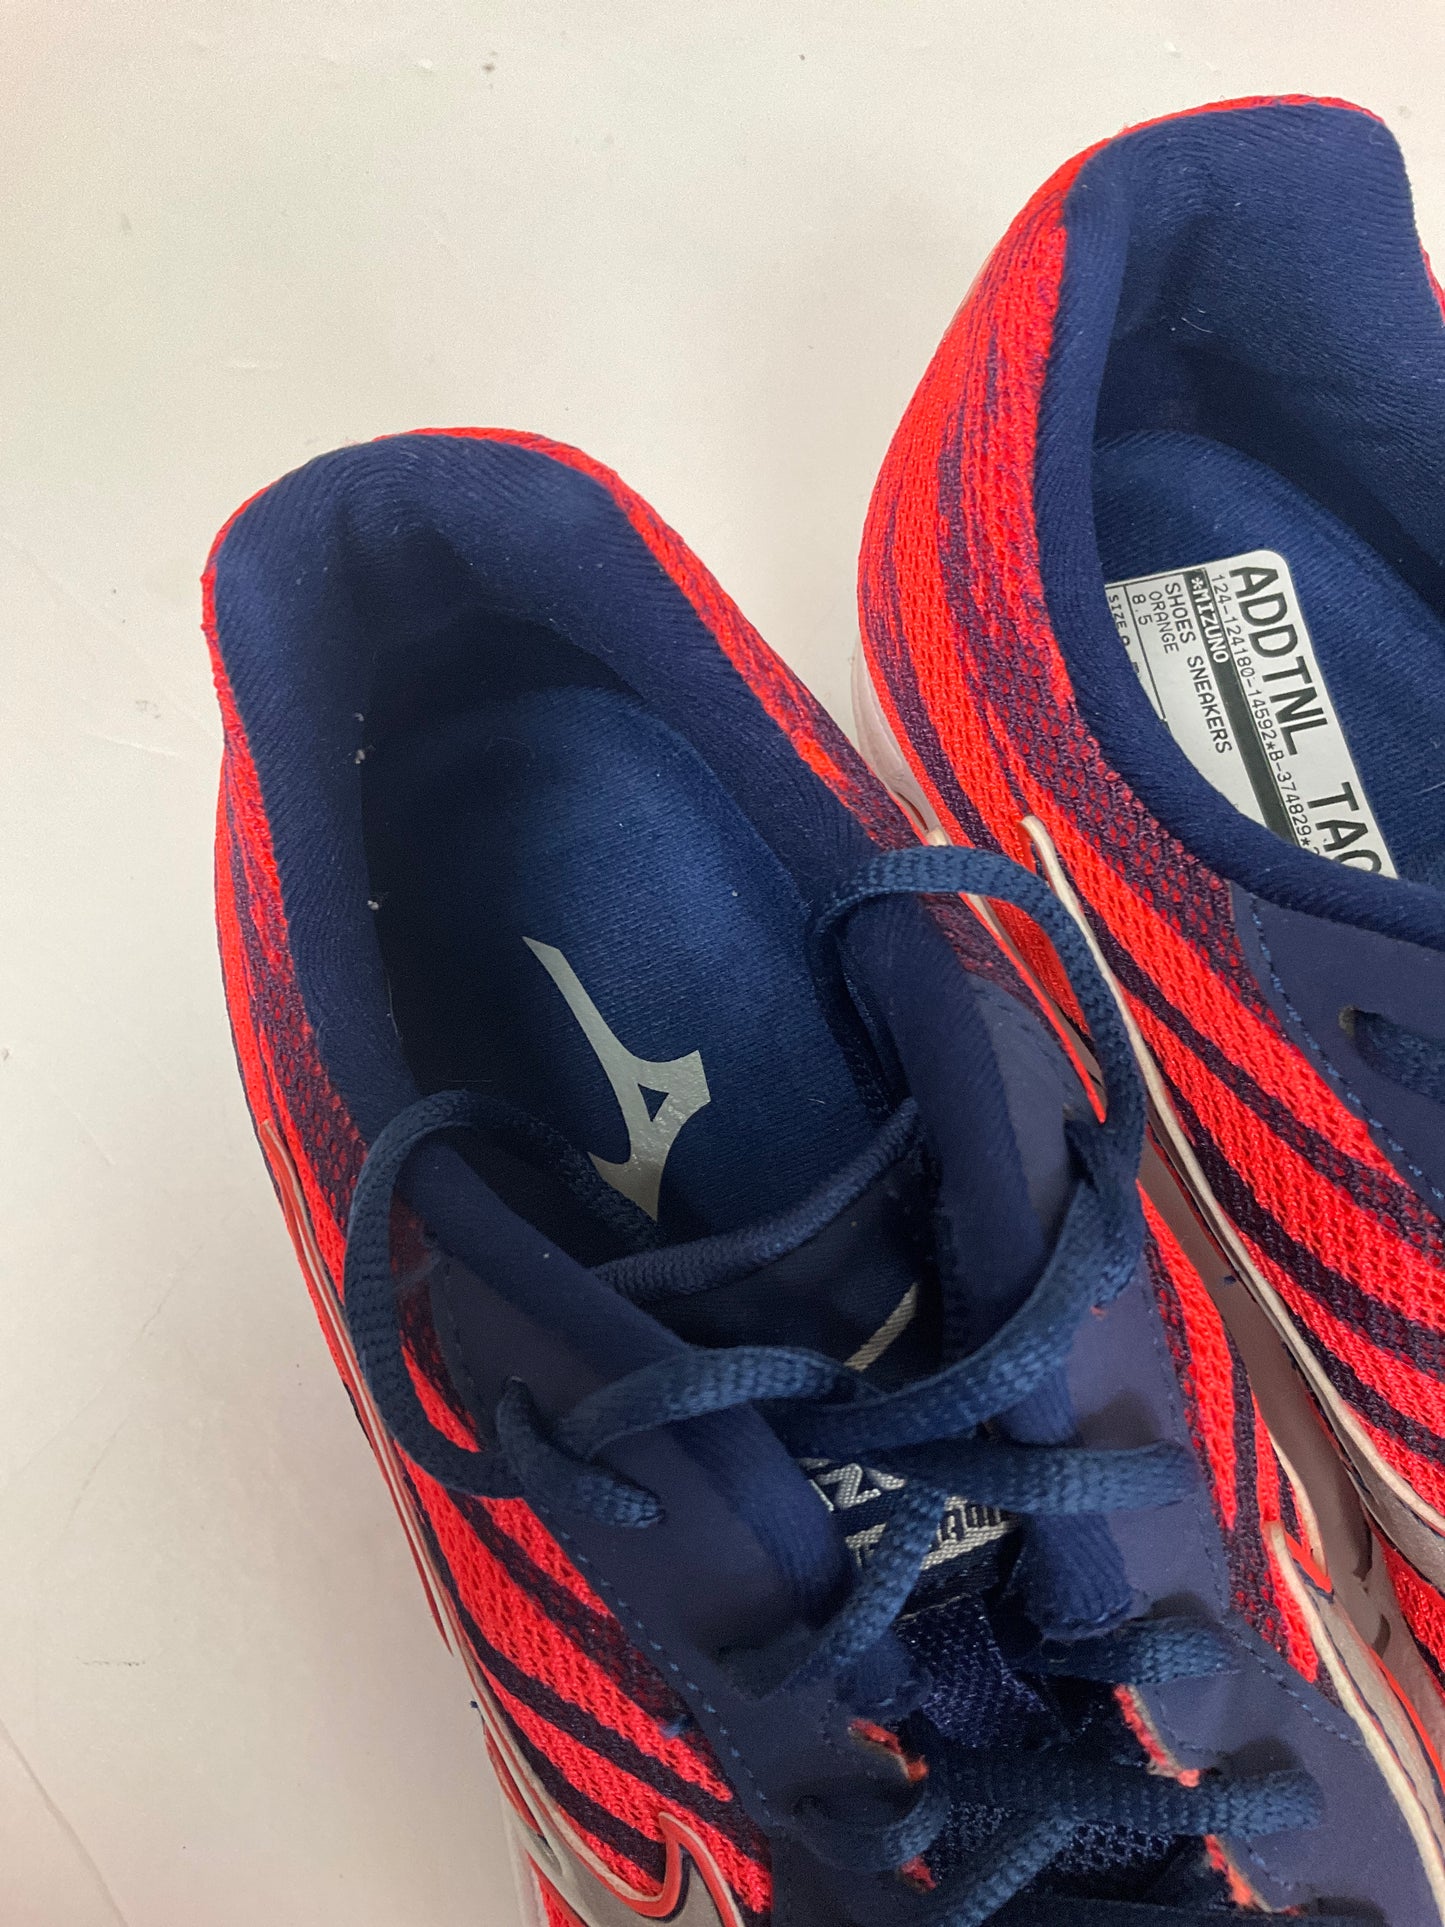 Shoes Sneakers By Mizuno  Size: 8.5